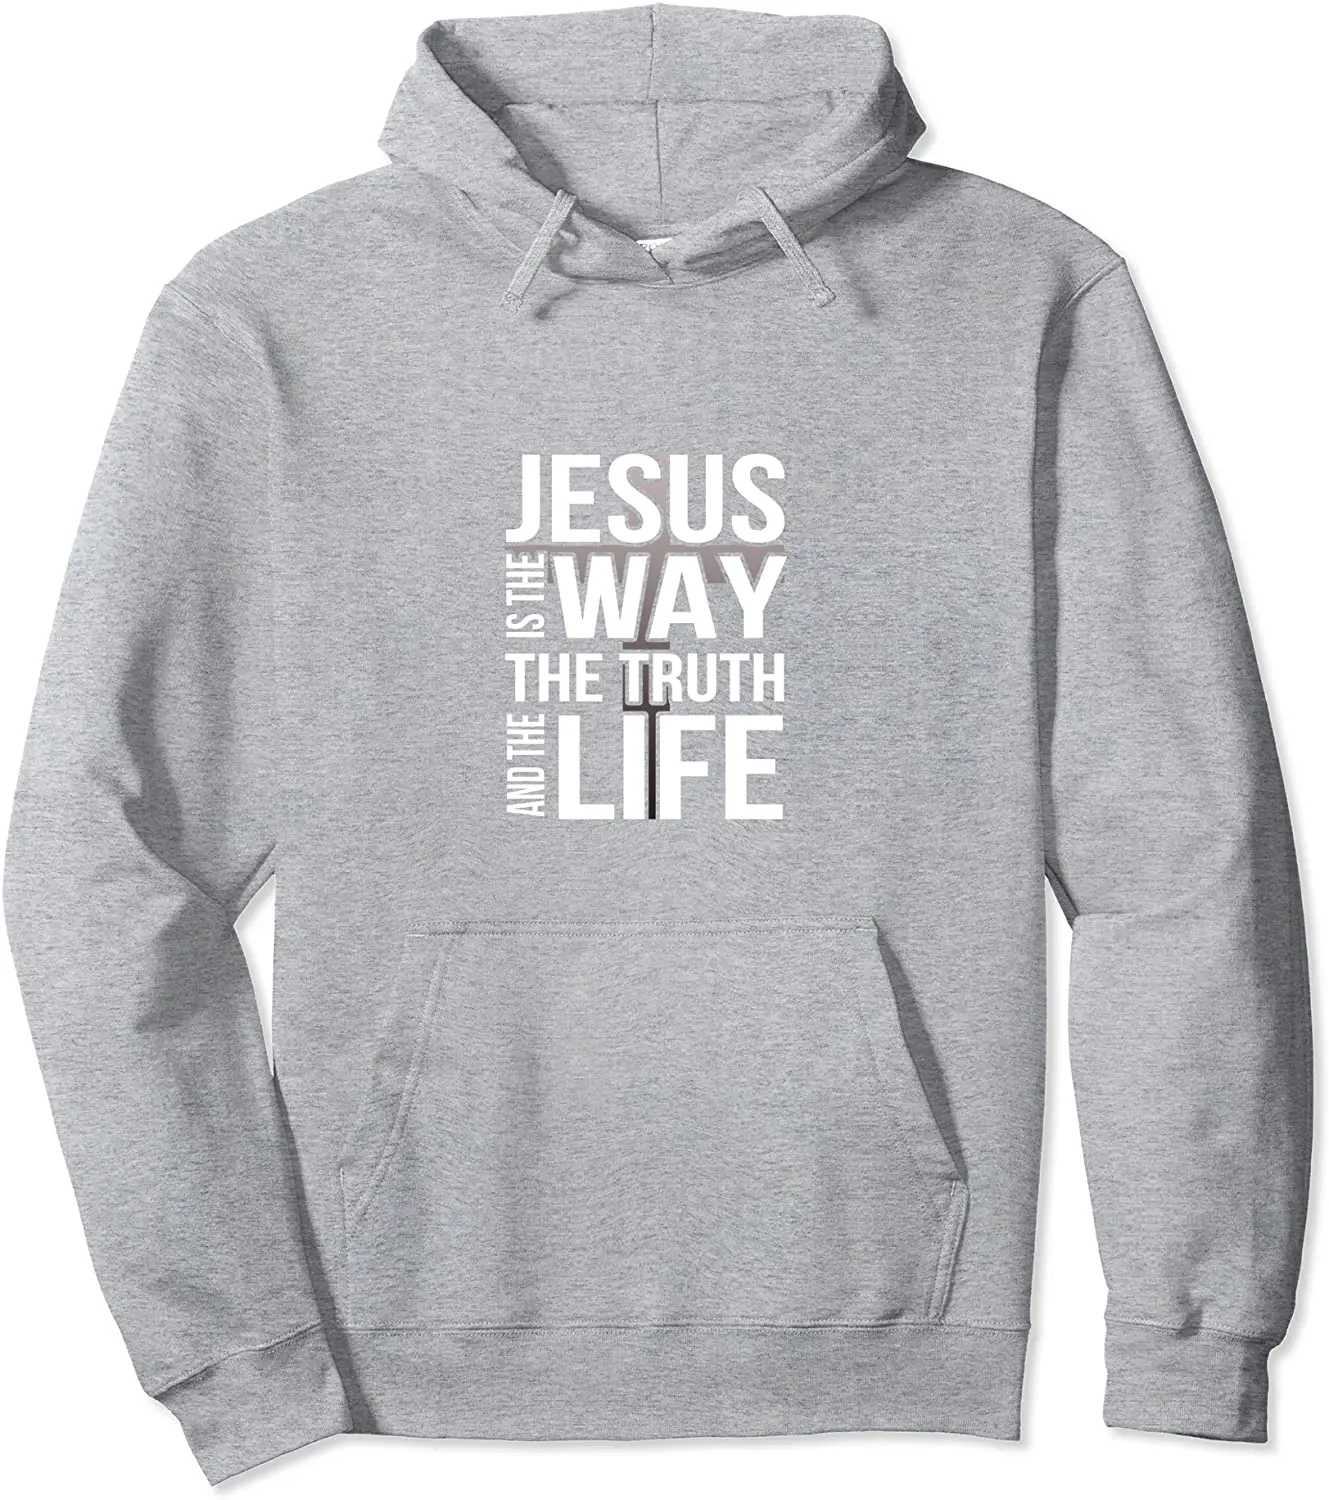 Jesus is the way the truth and the life Pullover Hoodie alexander tsutserov glory grace and truth